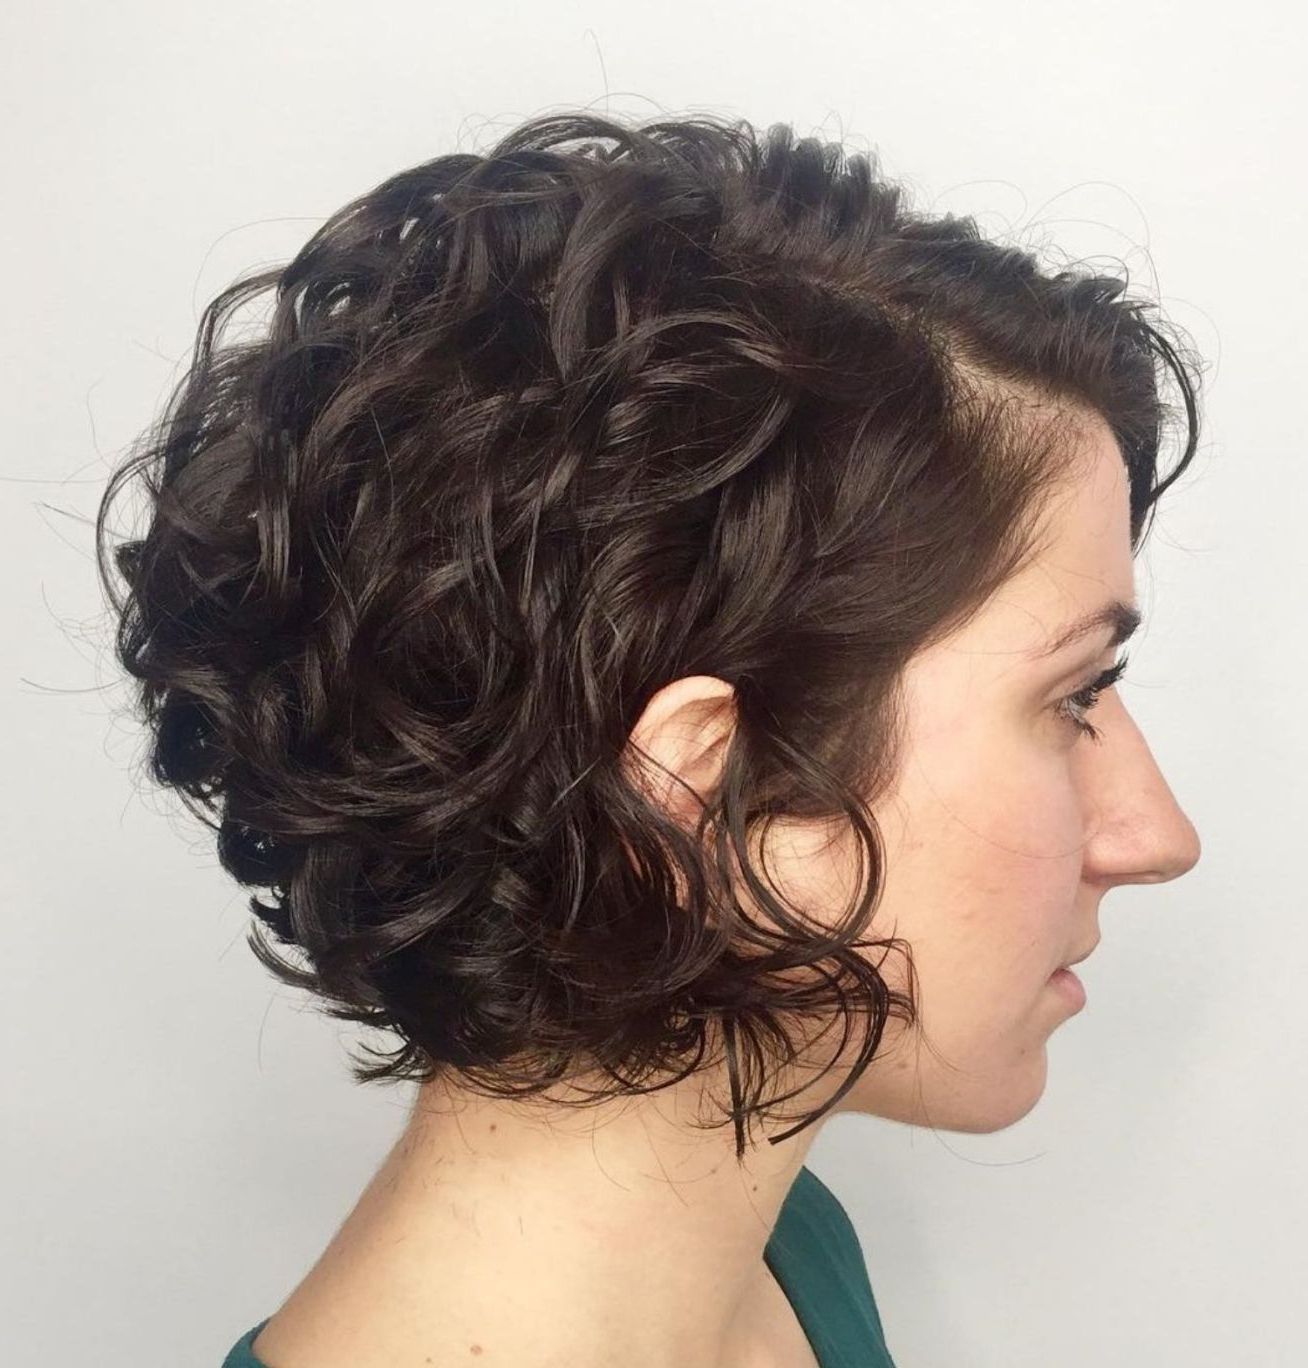 Preferred Short Wavy Bob Hairstyles With Bangs And Highlights Inside Jaw Length Curly Bob With Bangs (View 4 of 20)